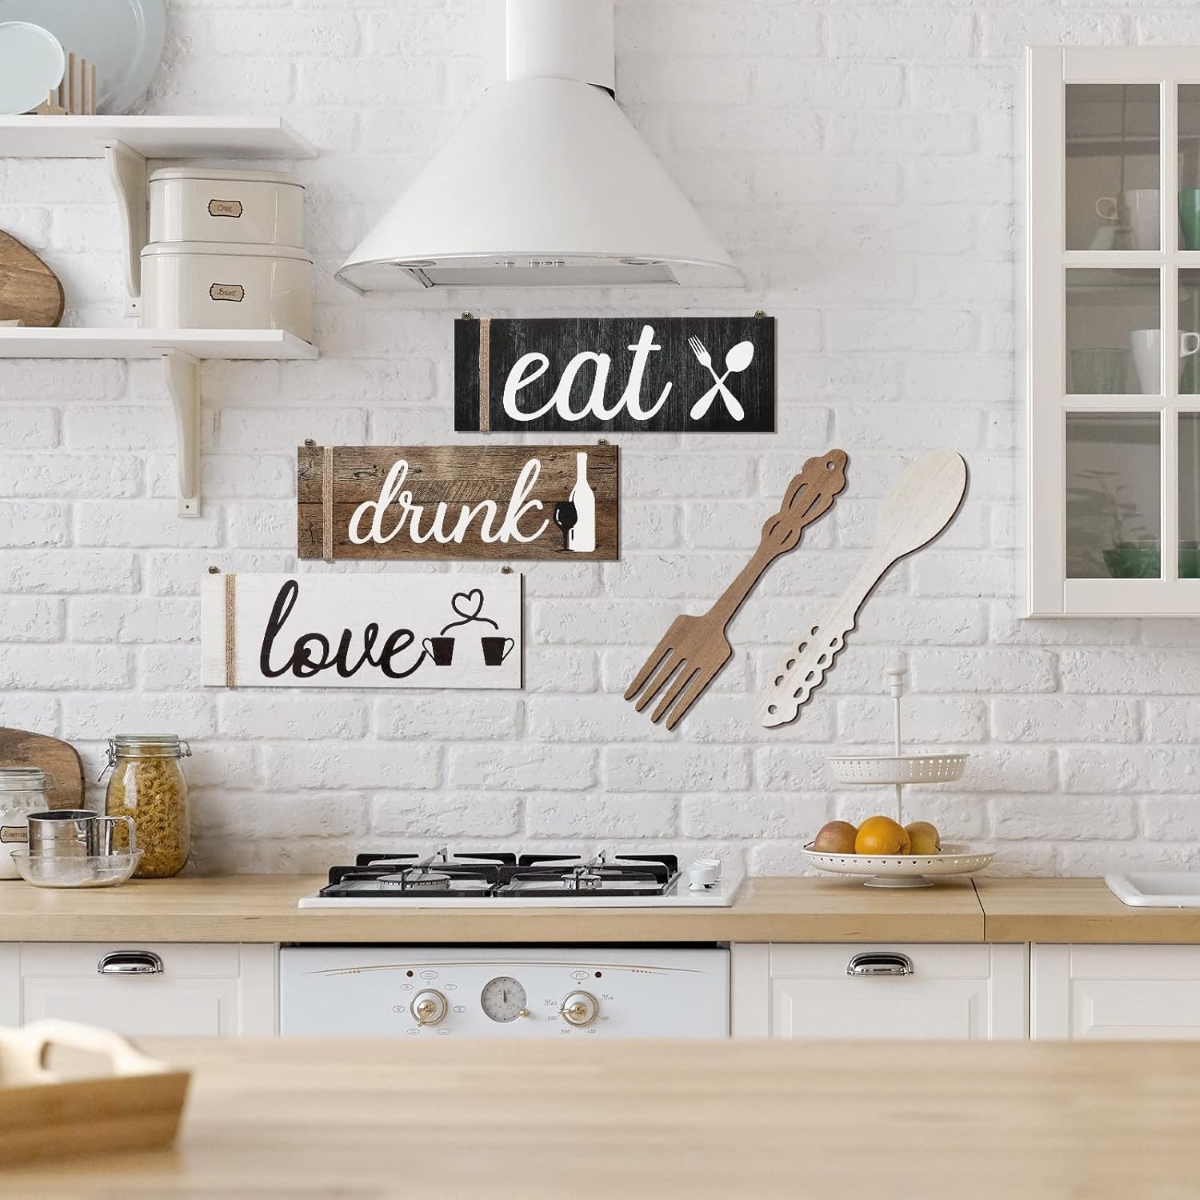 White kitchen with three large word signs on wall.